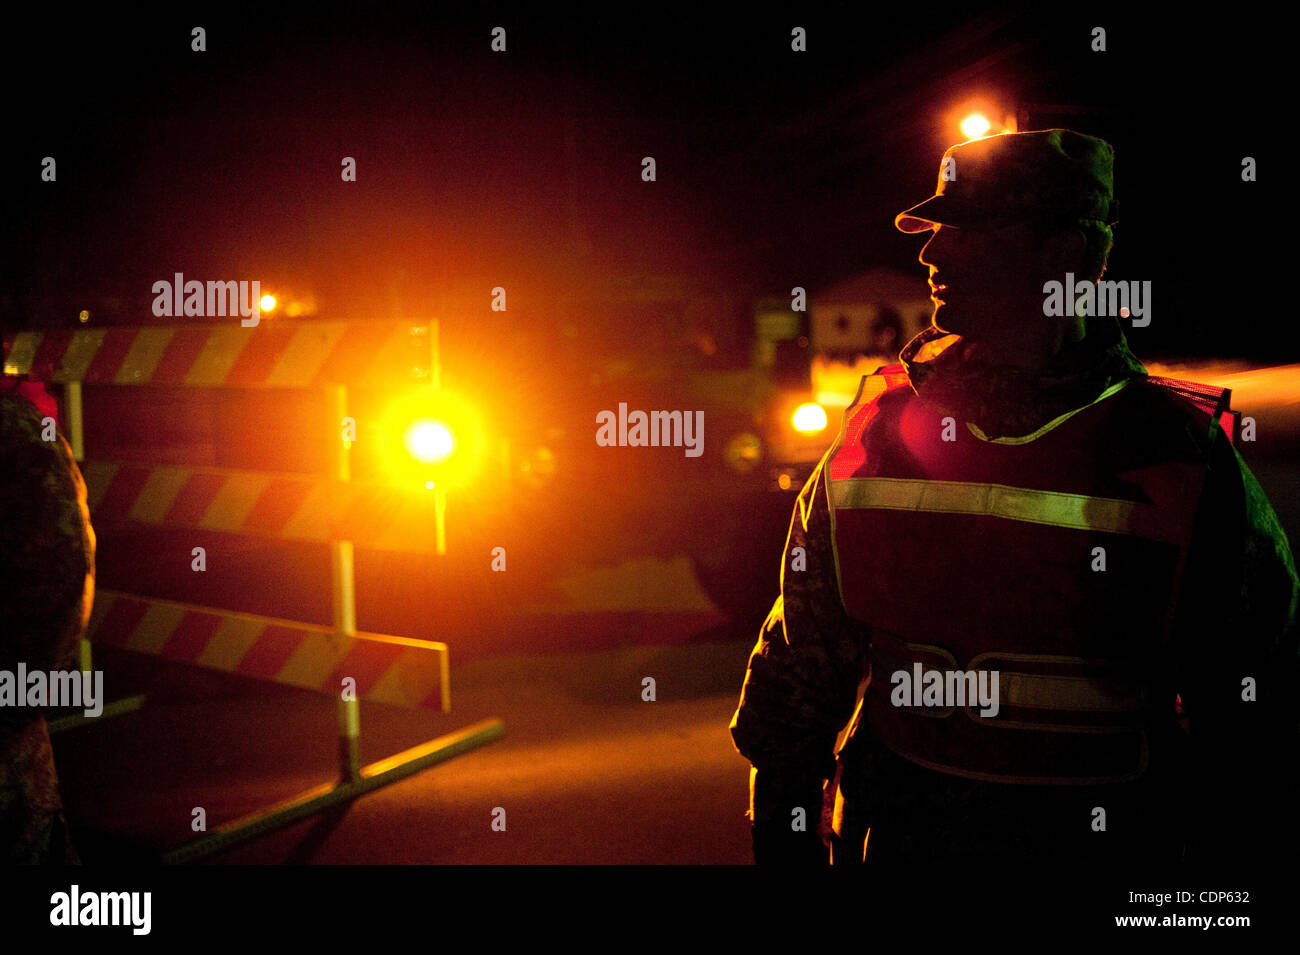 Apr 27, 2011 - Poplar Bluff, Missouri, U.S. - Private First Class Dakotah Vert waits at a check point on Route 53 on Wednesday night. Checkpoints were set to reduce looting and to keep people out of dangerously flooded areas. Vert struggled with boredom during his 12 plus hour shift. (Credit Image:  Stock Photo